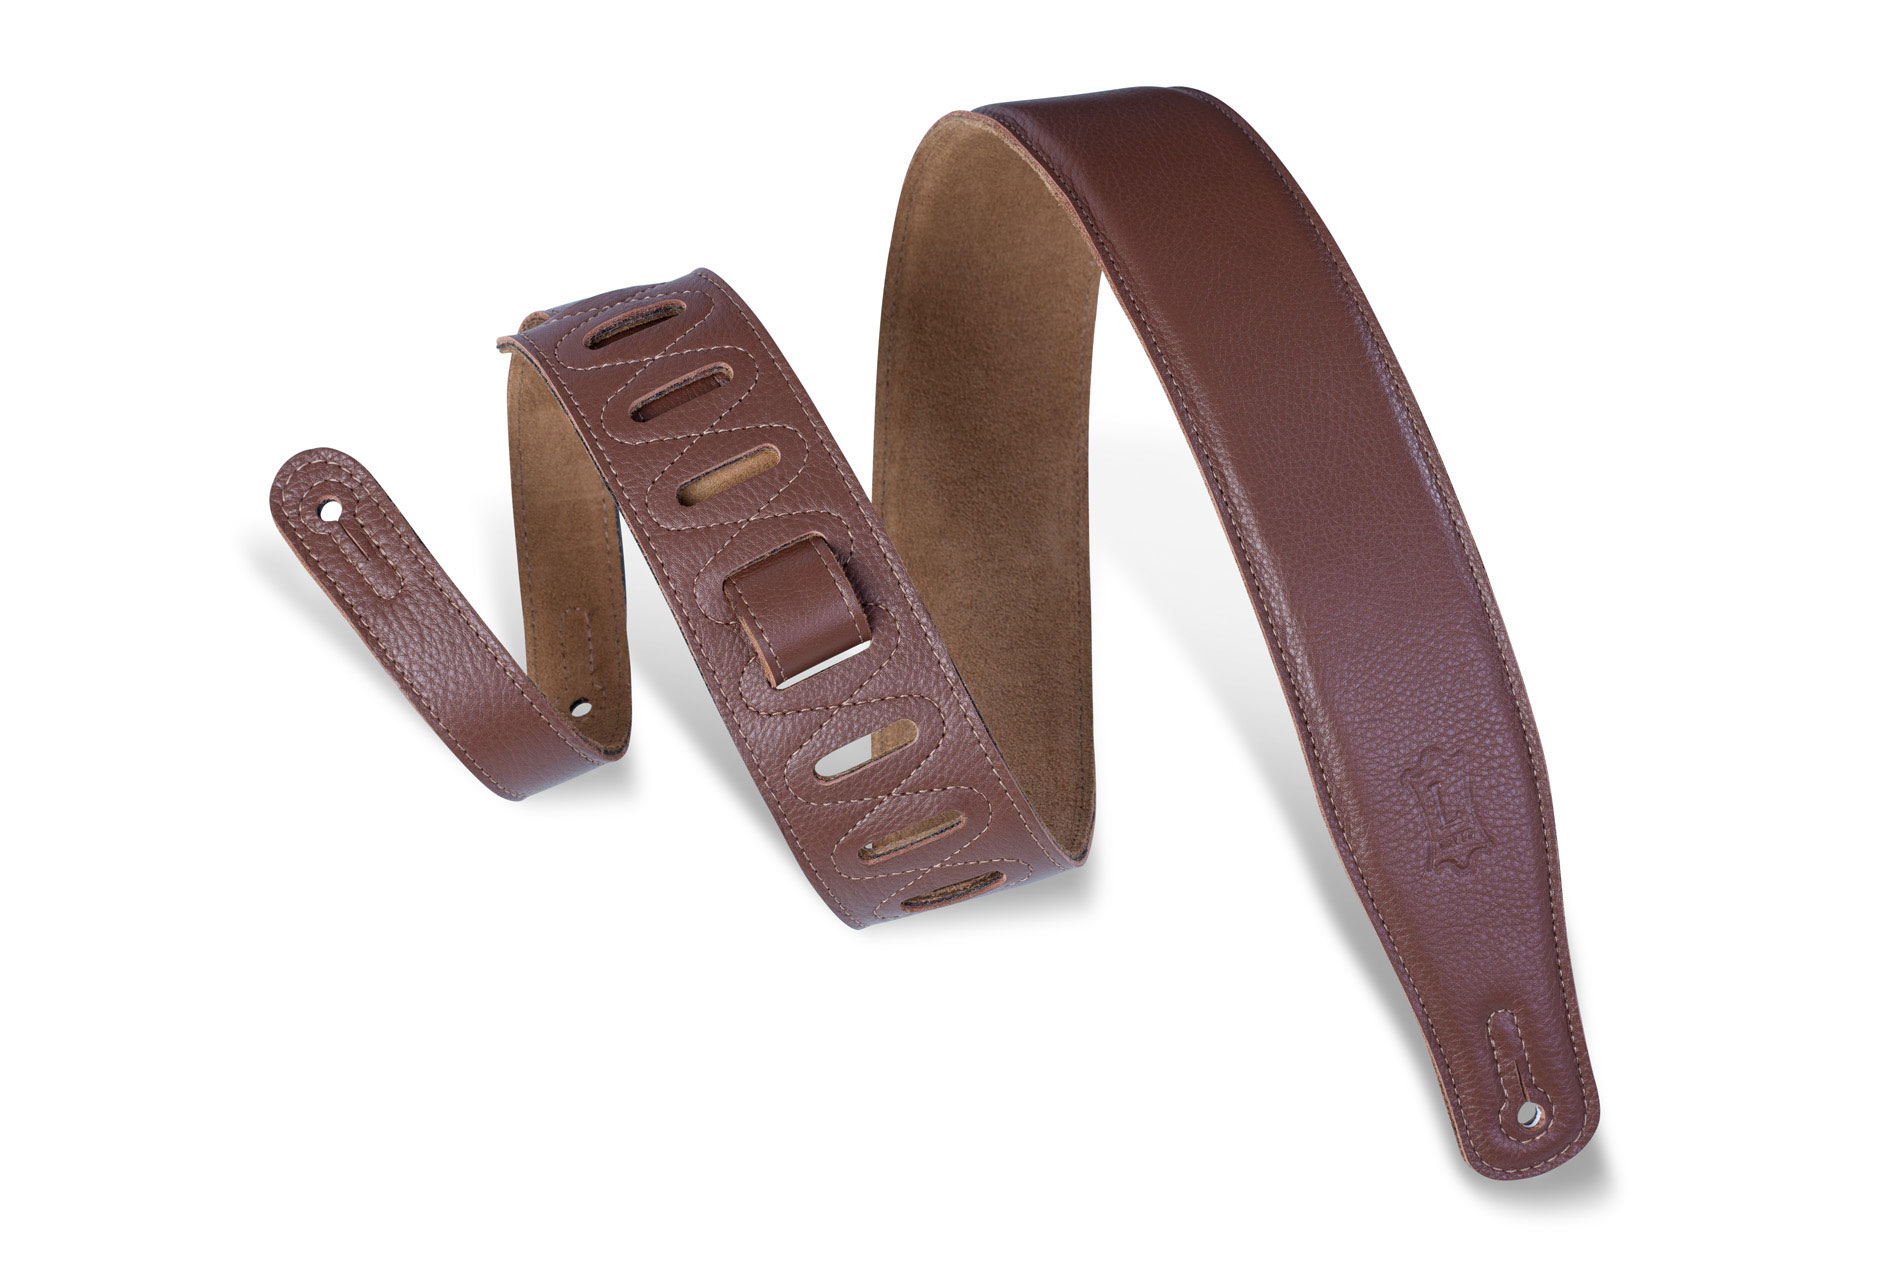 Levy's Leather's Brown Garment Leather with Brown Suede Back Guitar Strap, M26GF-DBR